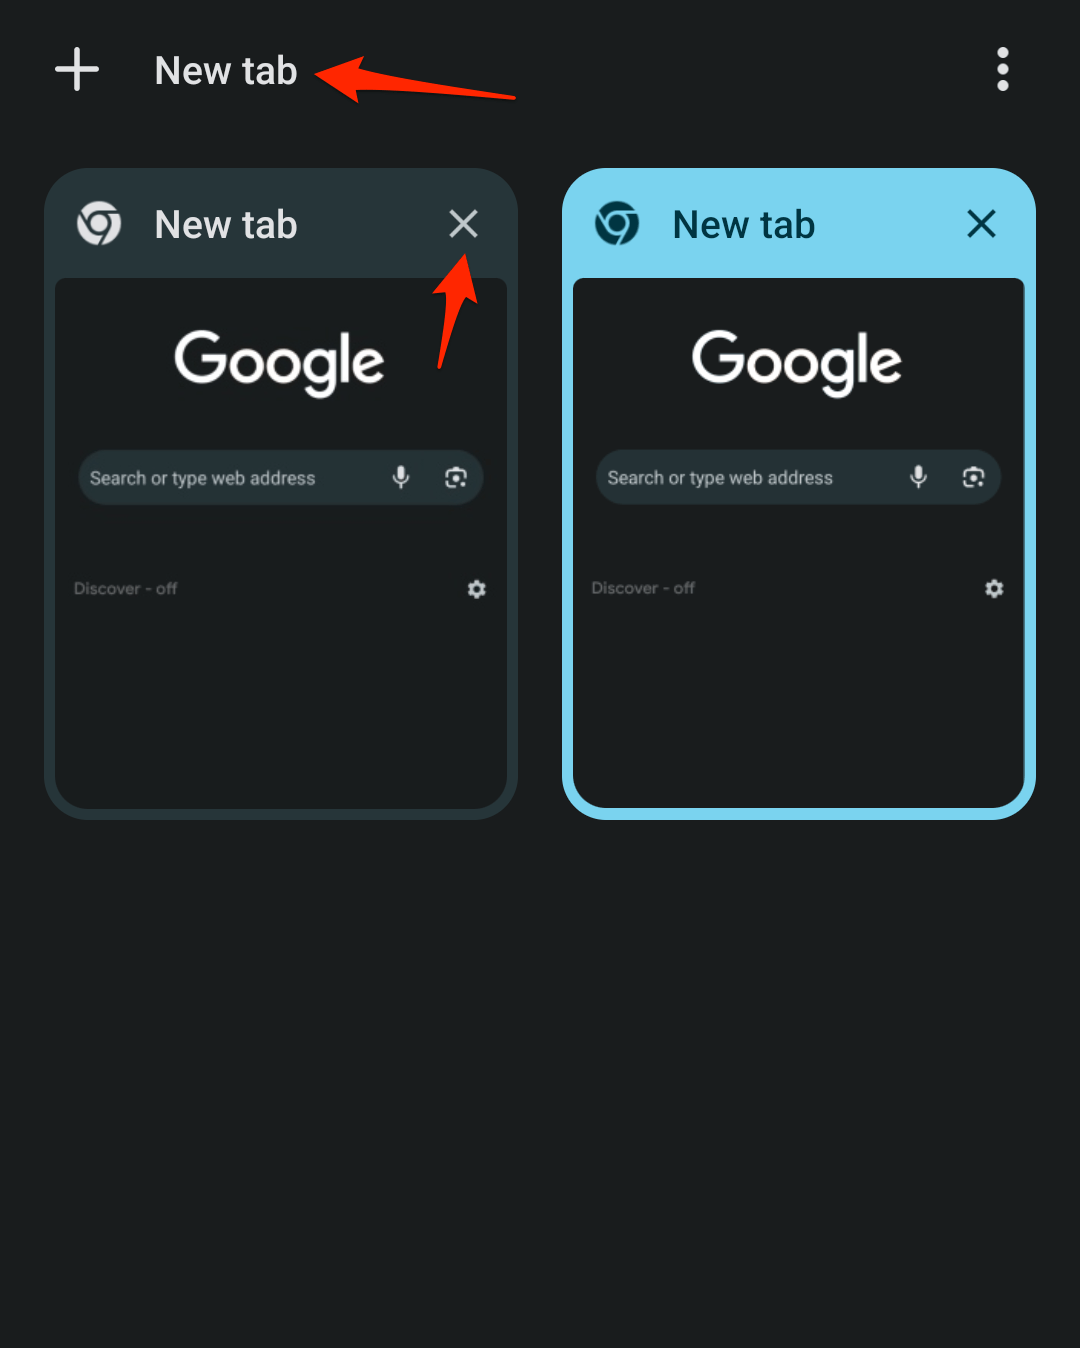 Open New Tab and Close a Tab in Chrome Android from Tab Overview screen